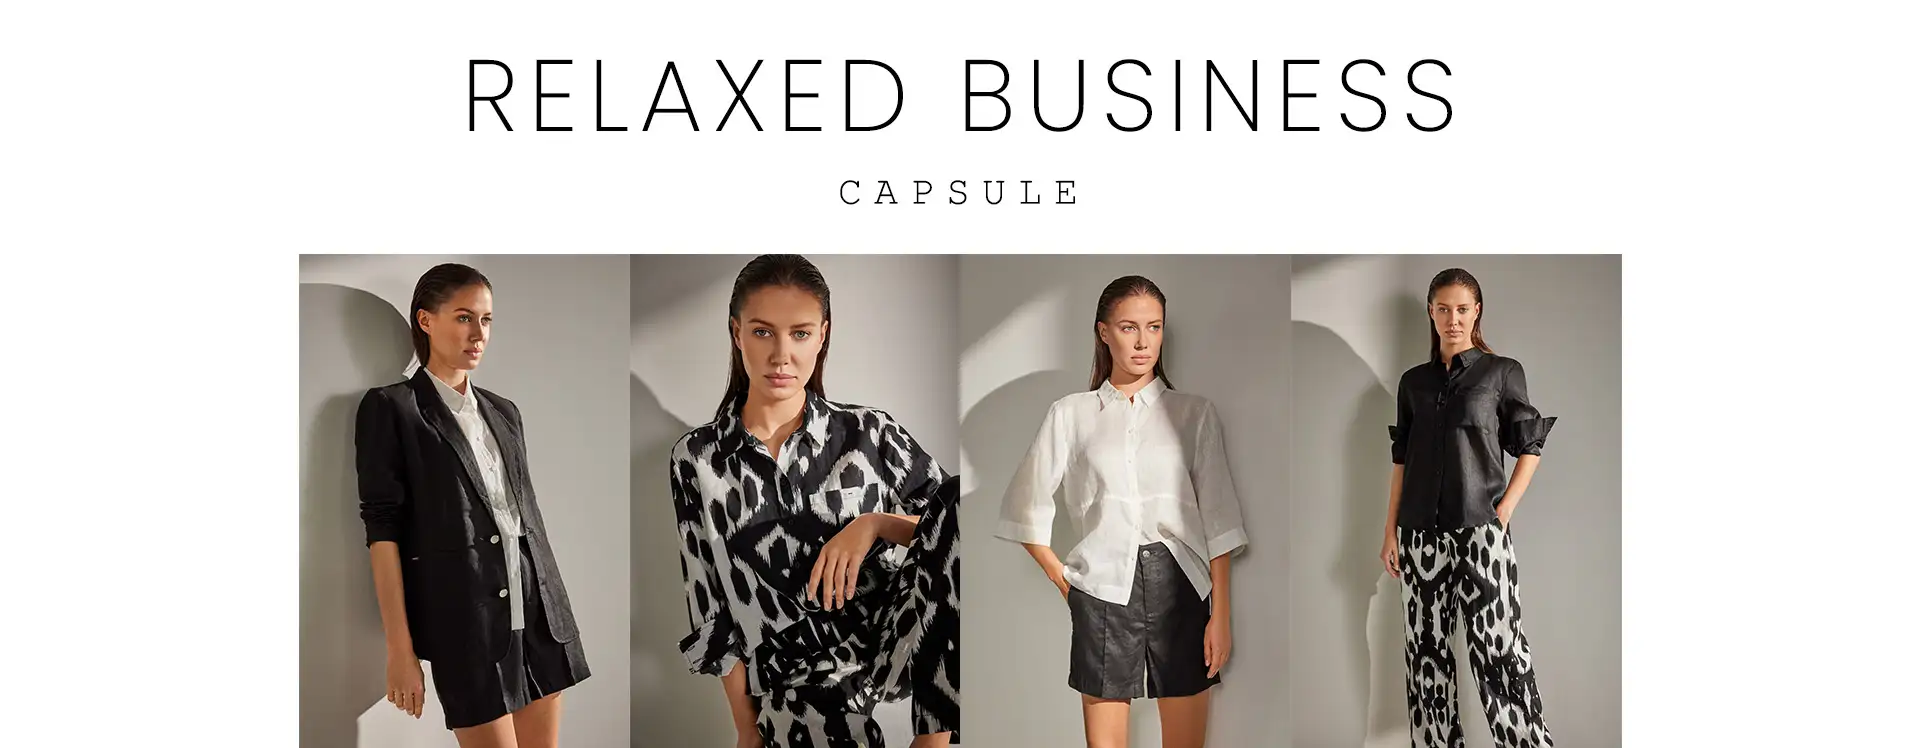 Relaxed Business Capsule